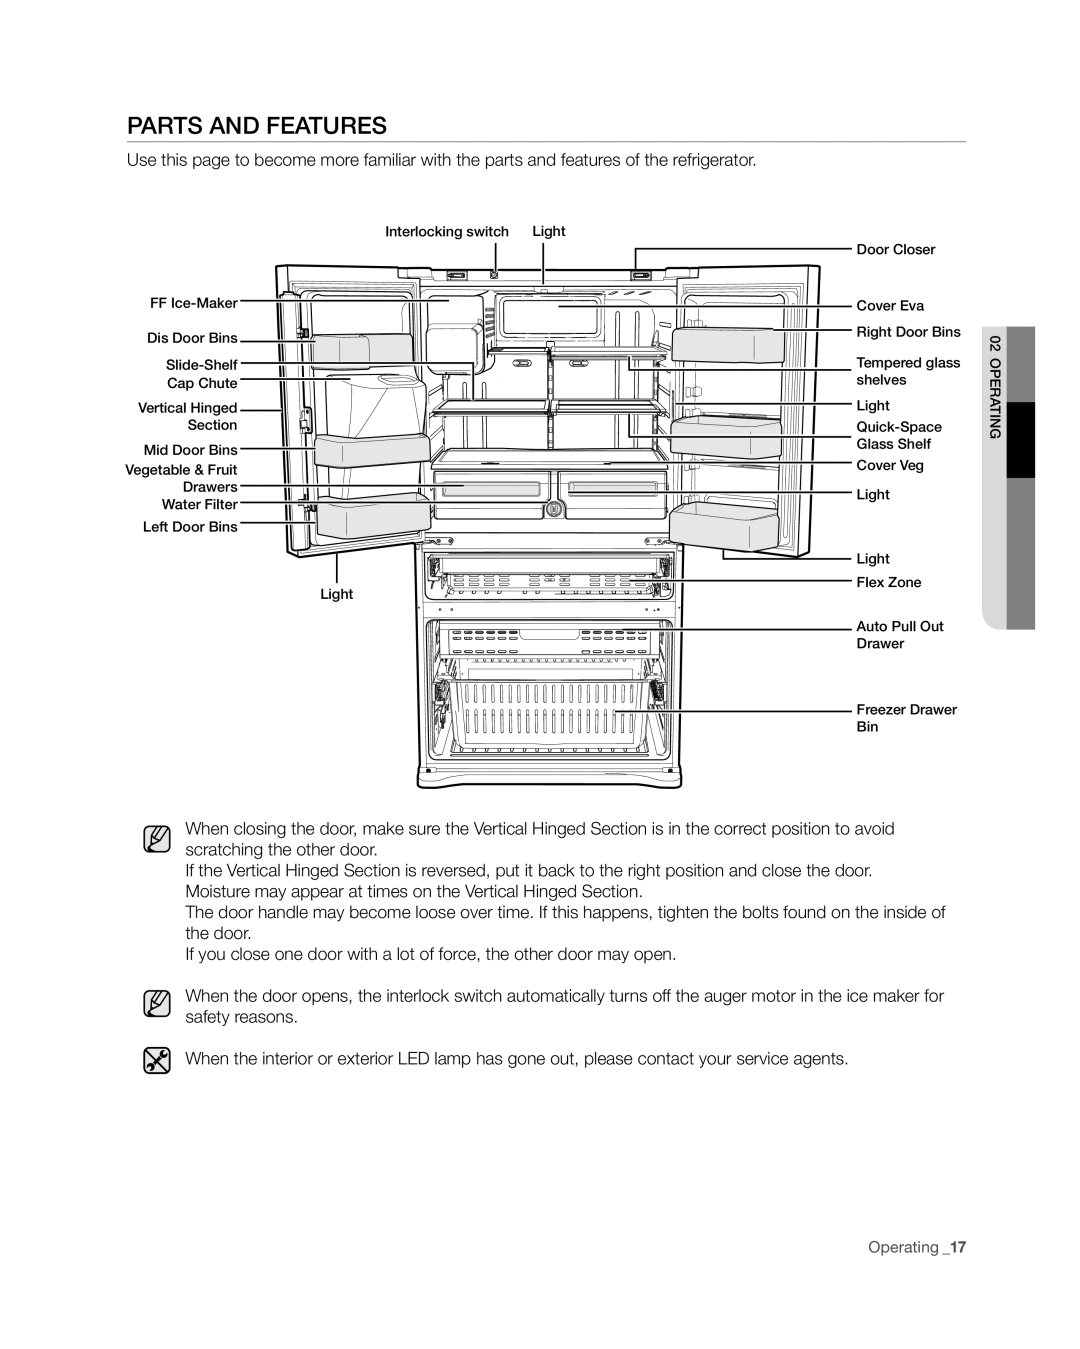 Samsung RF4267HA user manual Parts and features, Operating _17 